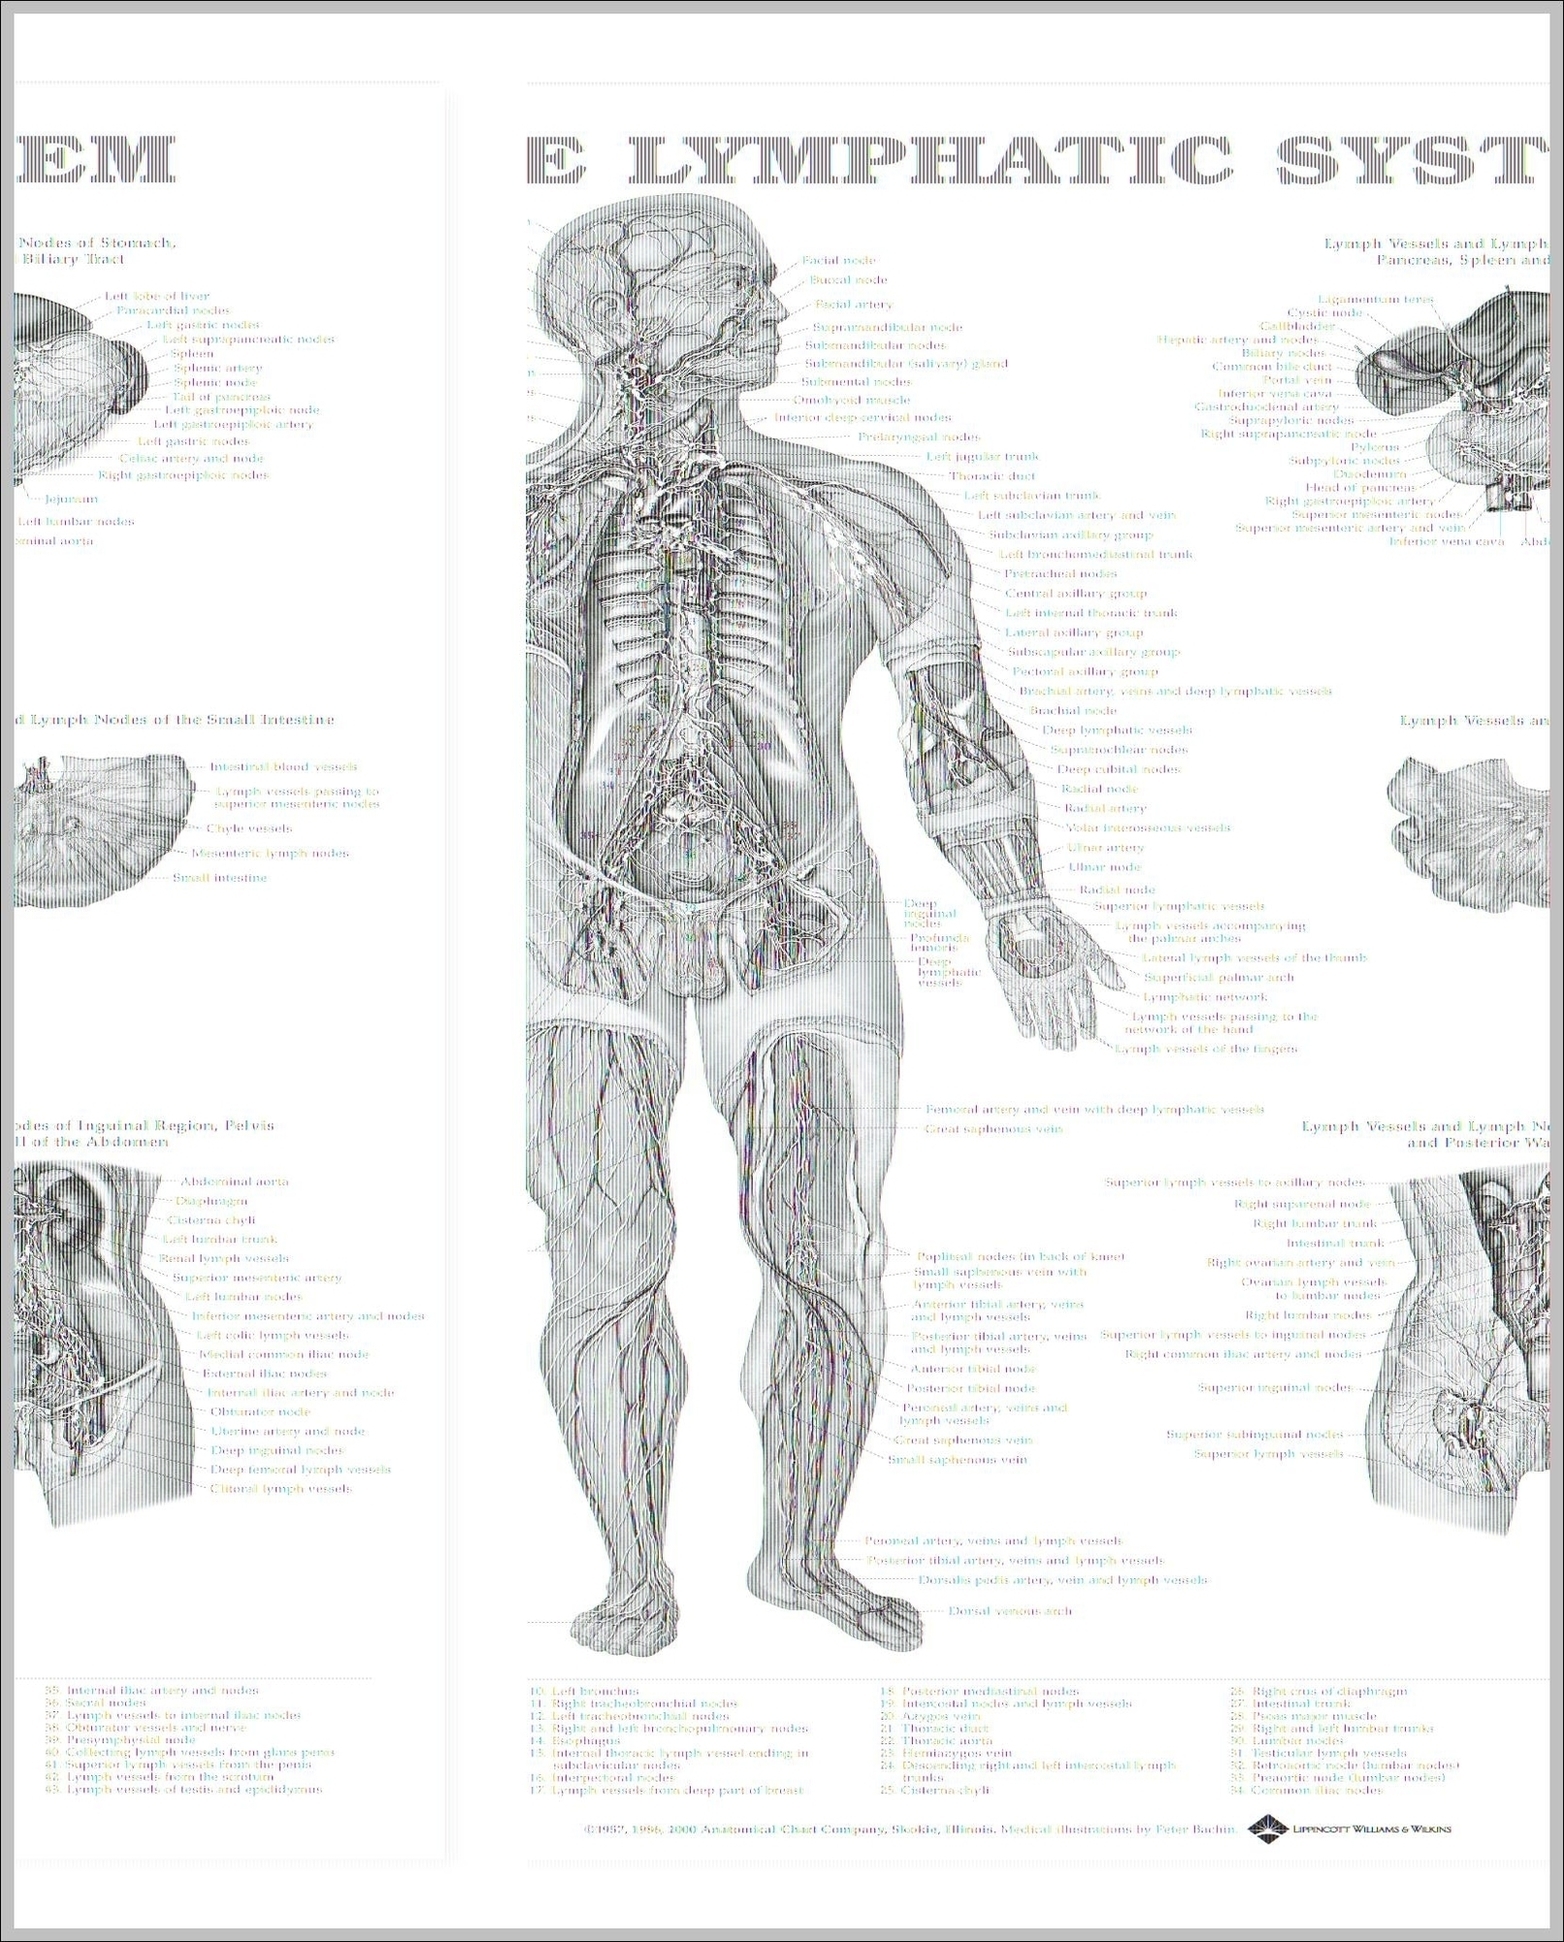 Lymphatic System Pictures Image